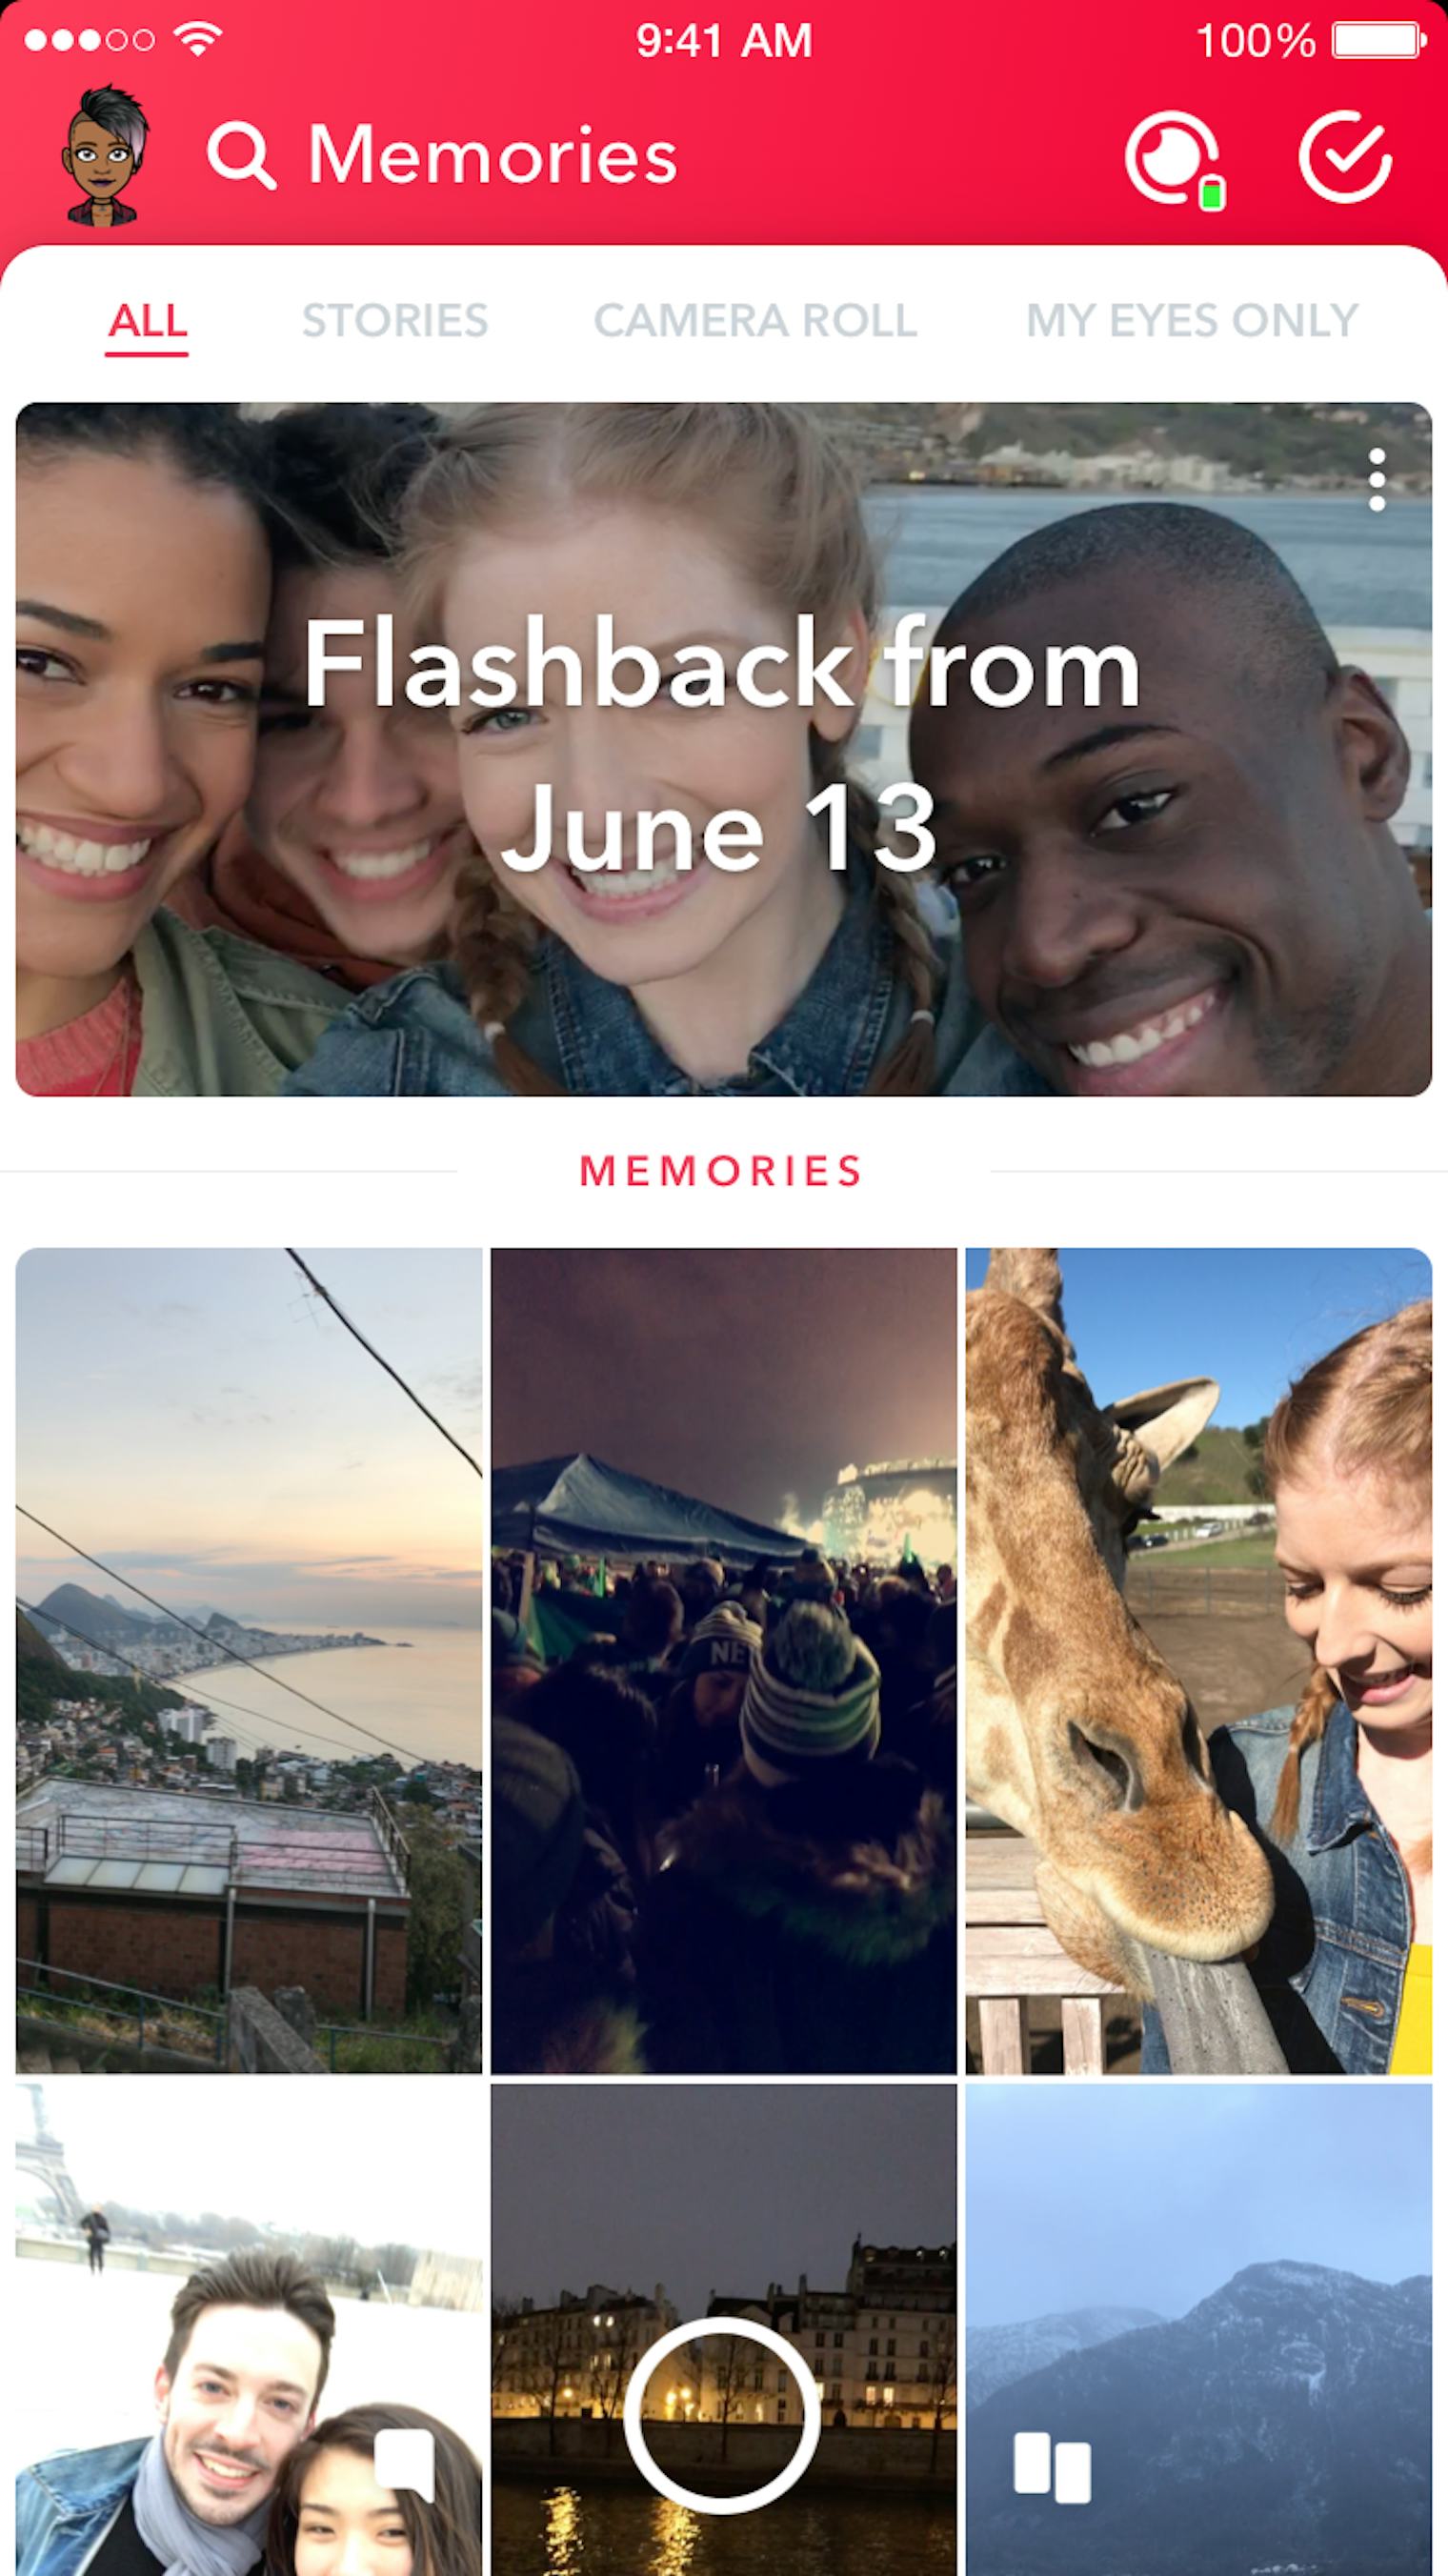 How To Use Flashback Stories On Snapchat So You Can Relive Your